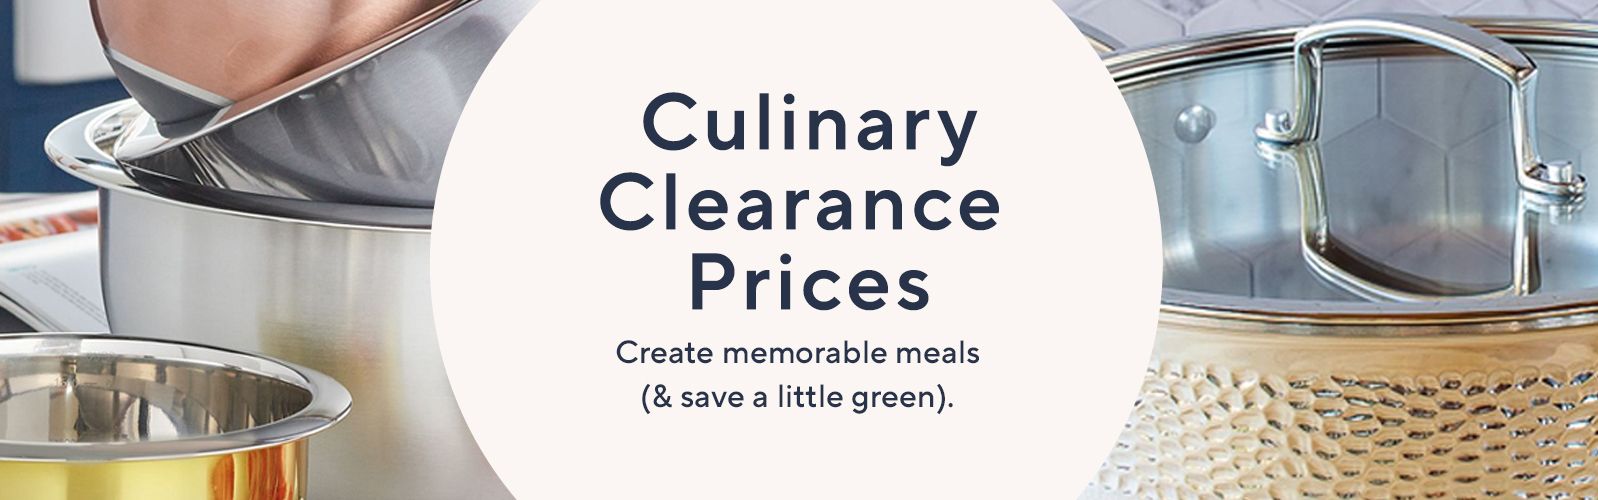 Culinary Clearance Prices  Create memorable meals (& save a little green). 